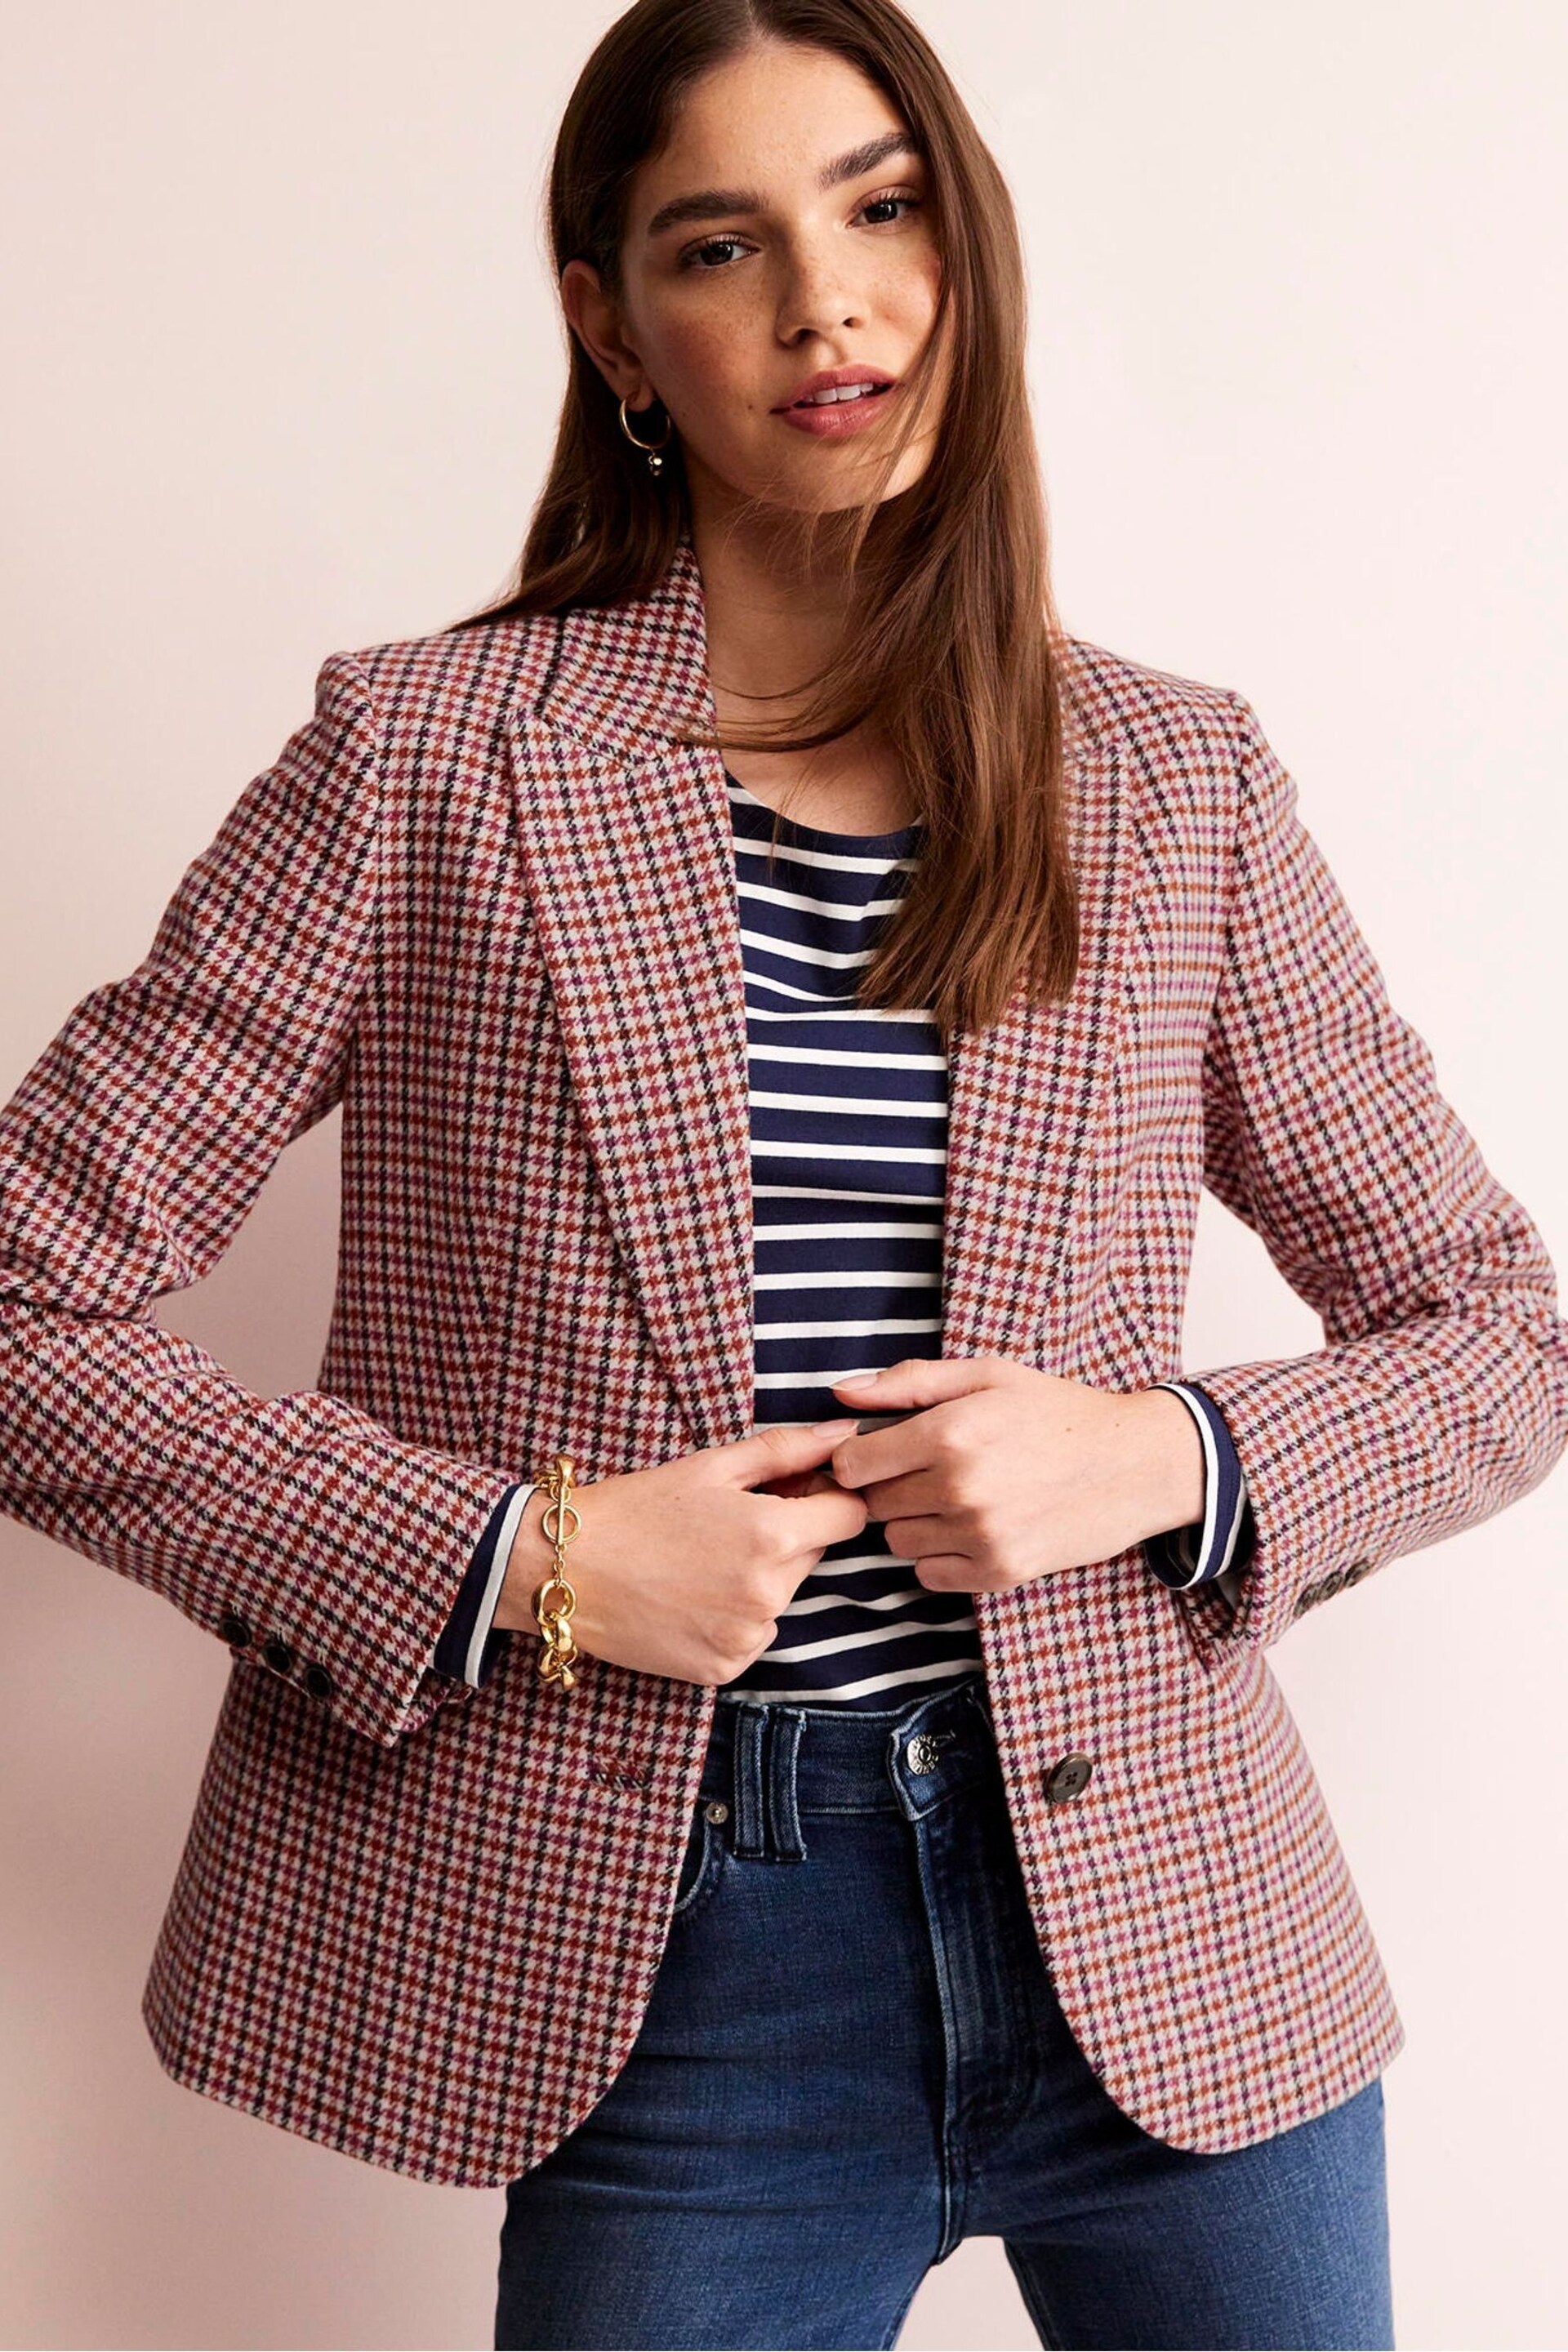 Boden Red The Marylebone Checked Blazer - Image 3 of 5